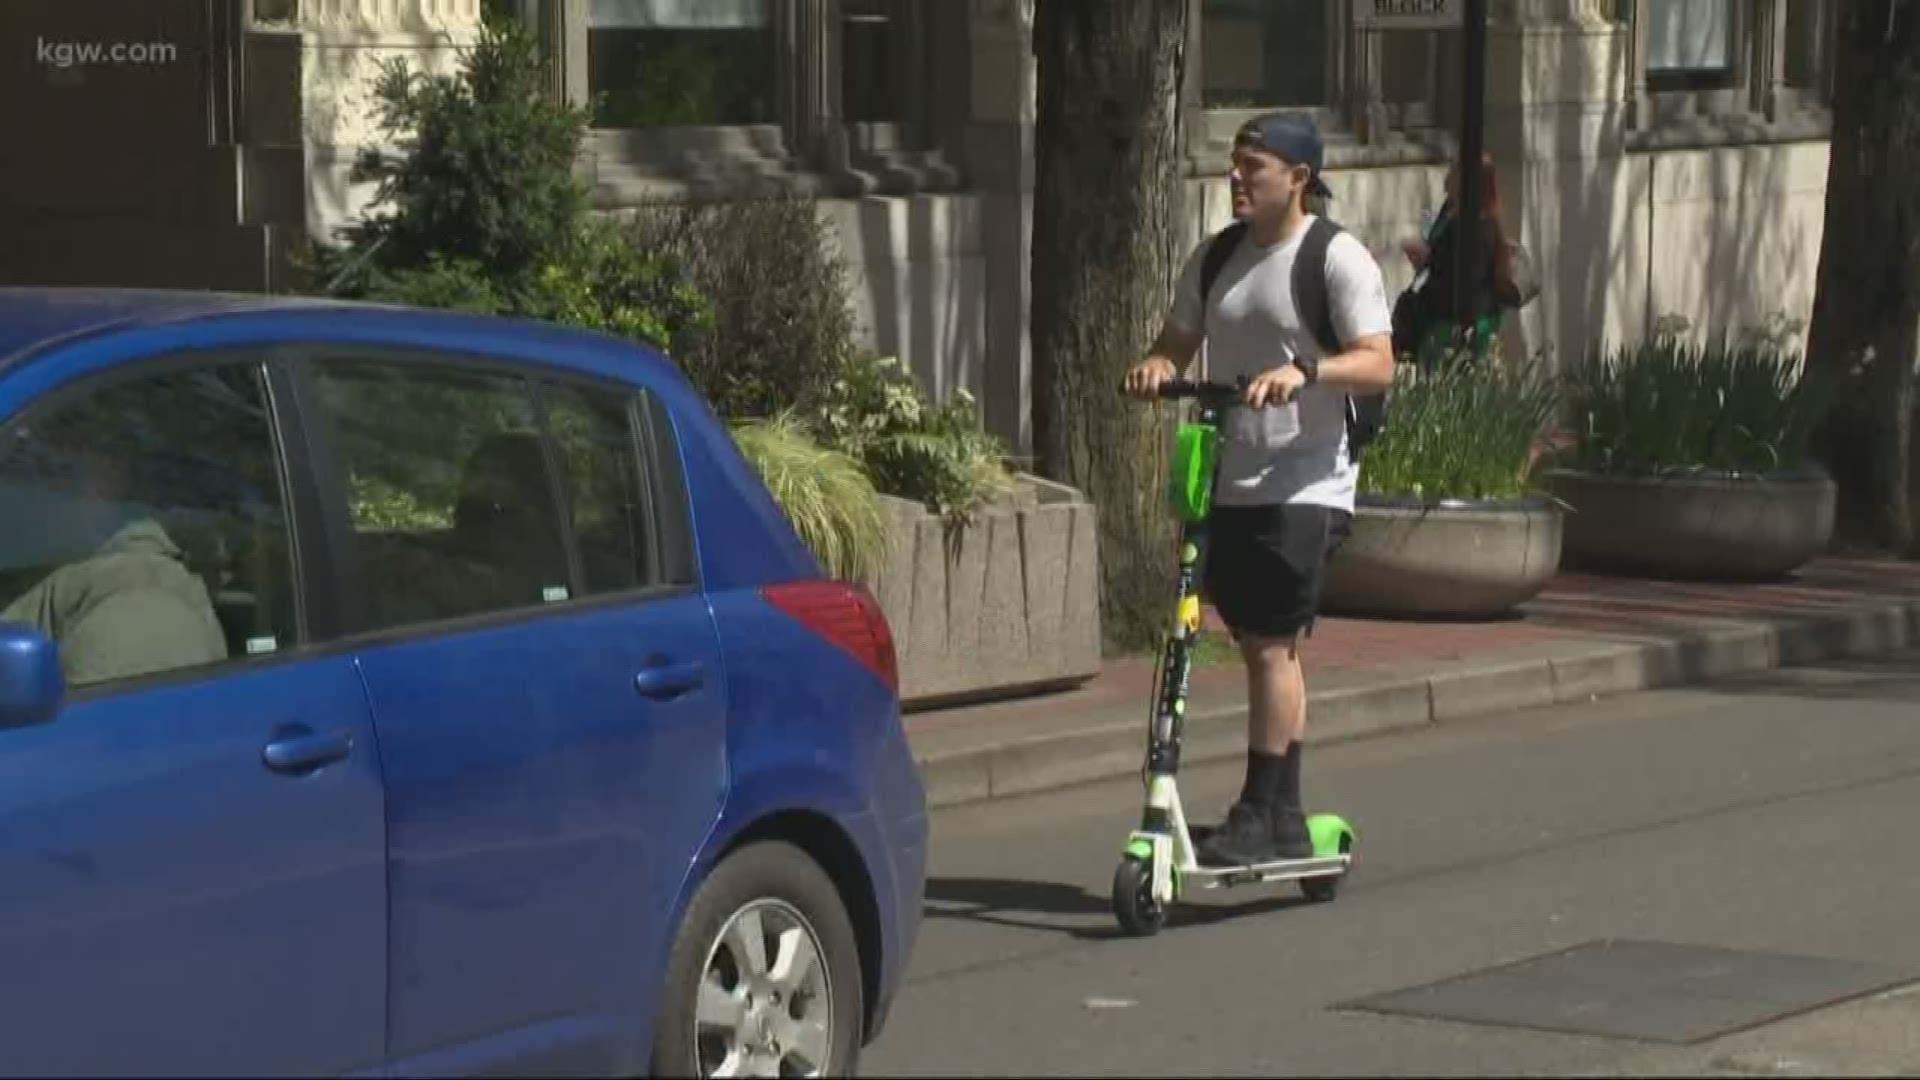 E-scooters are back in Portland for a 1 year pilot program.